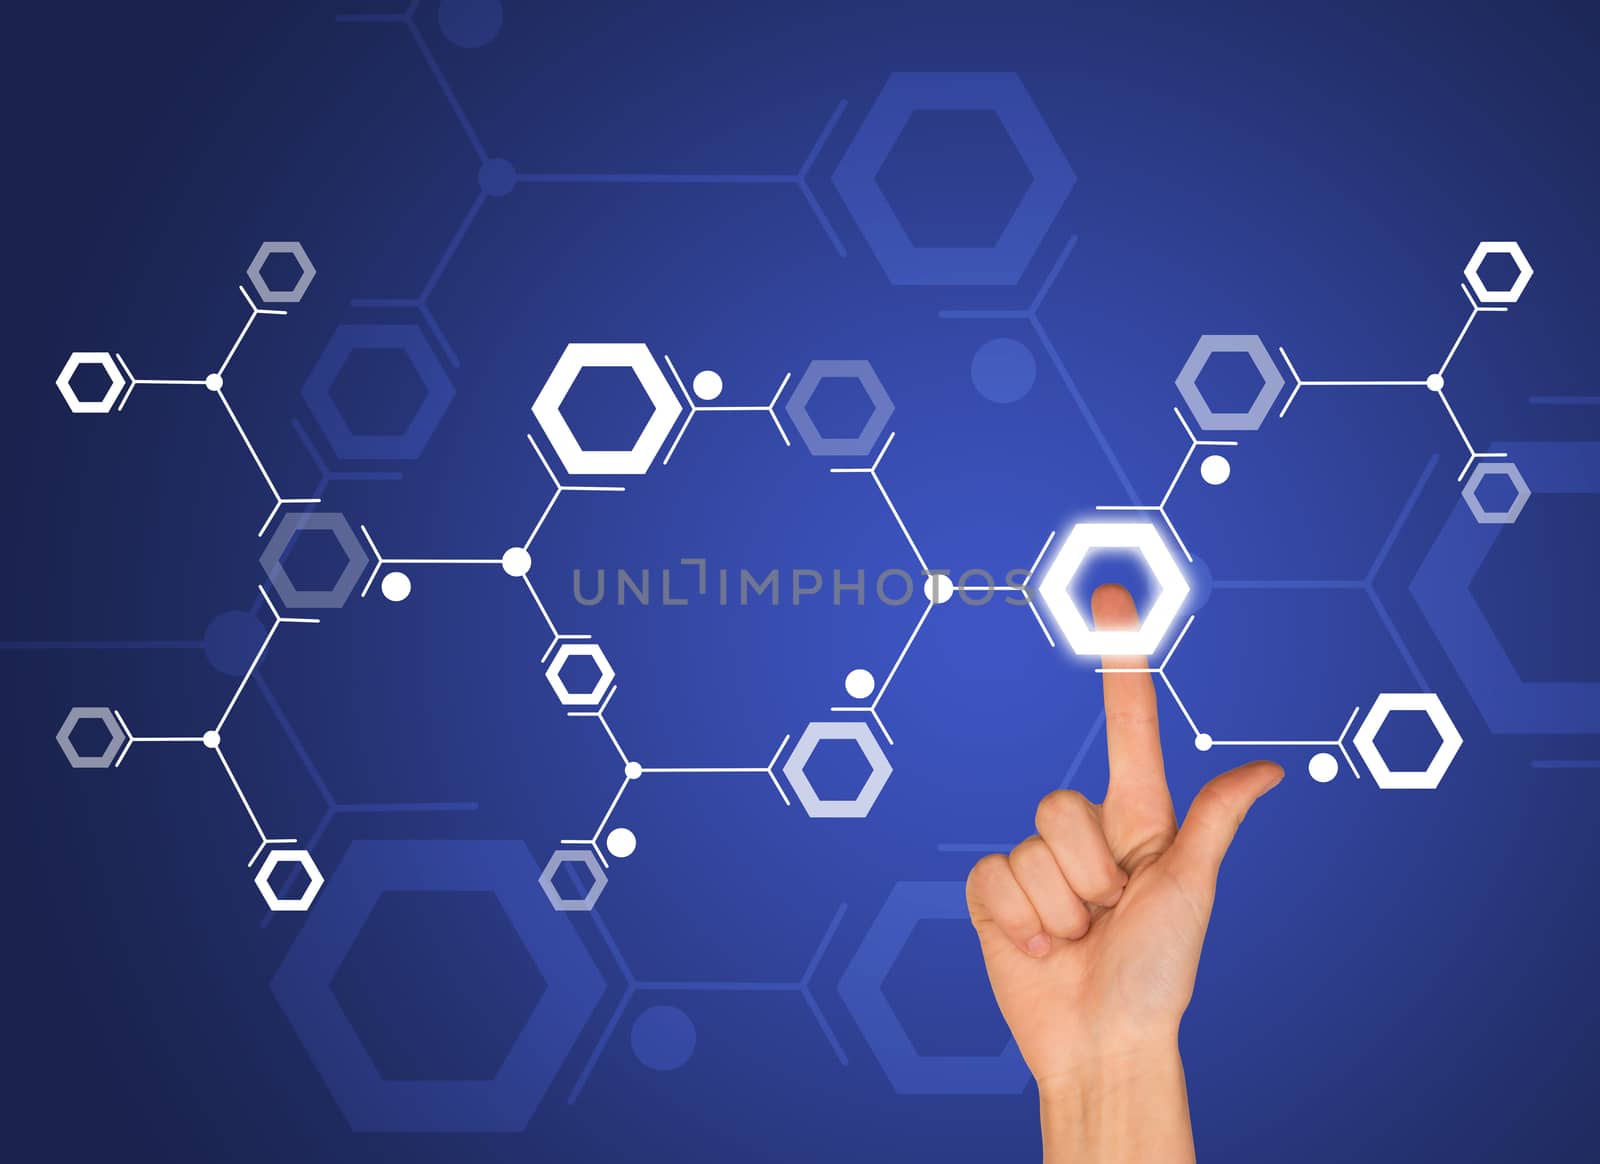 Forefinger presses on white hexagon on blue background. Connection concept